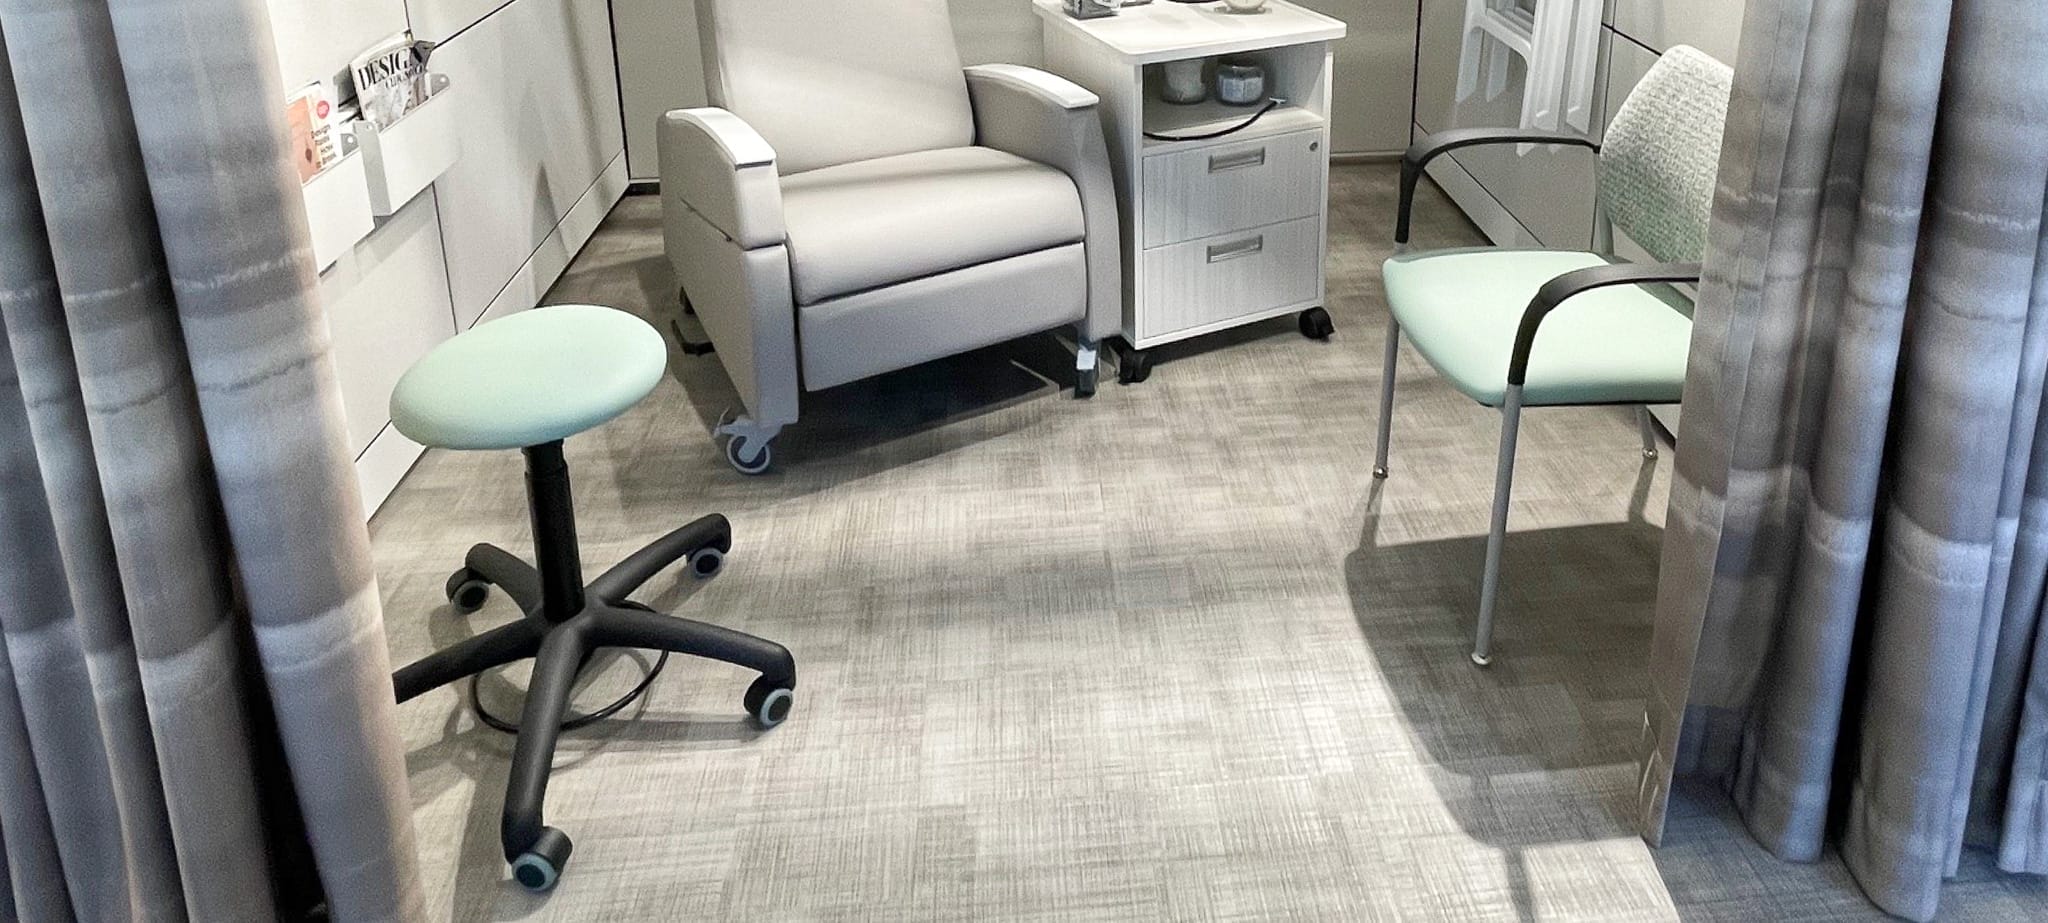 Healthcare resimercial trend at Neocon show